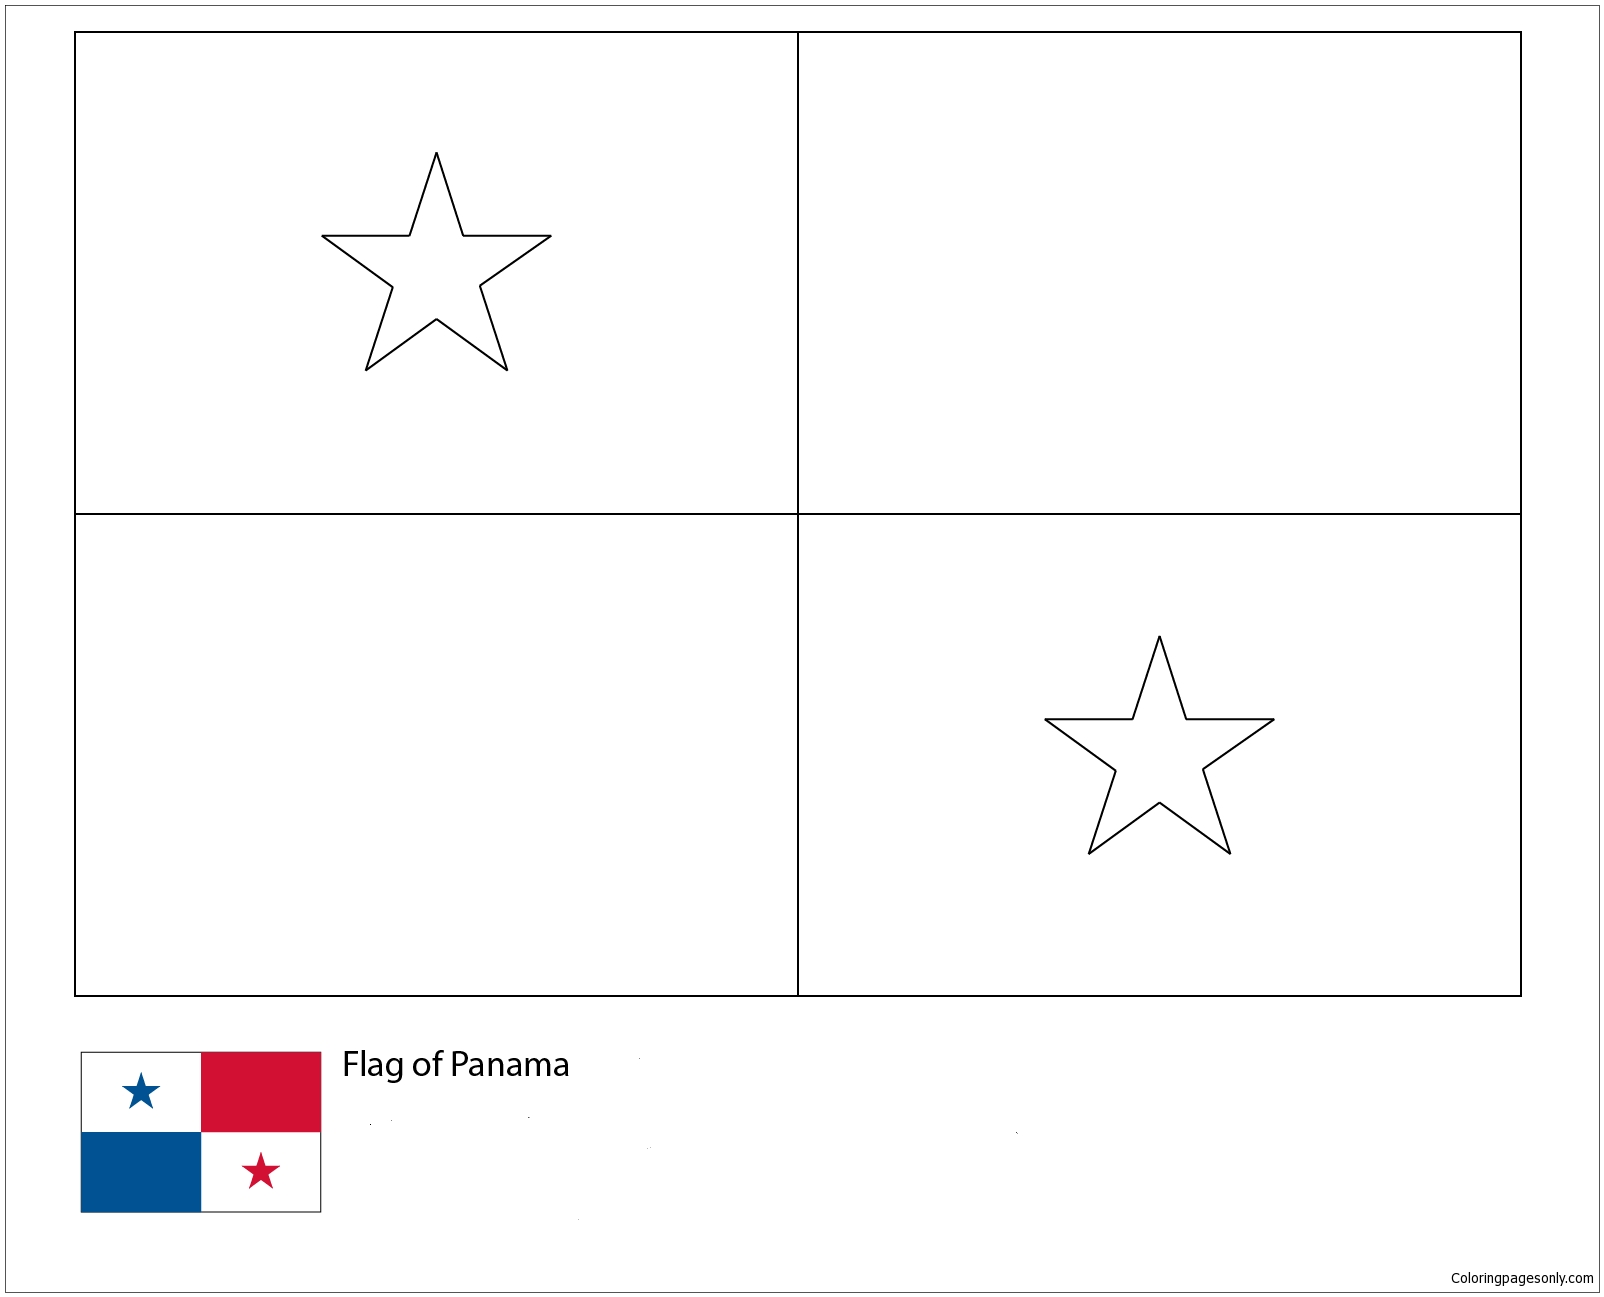 Flag of Panama-World Cup 2018 from World Cup 2018 Flags